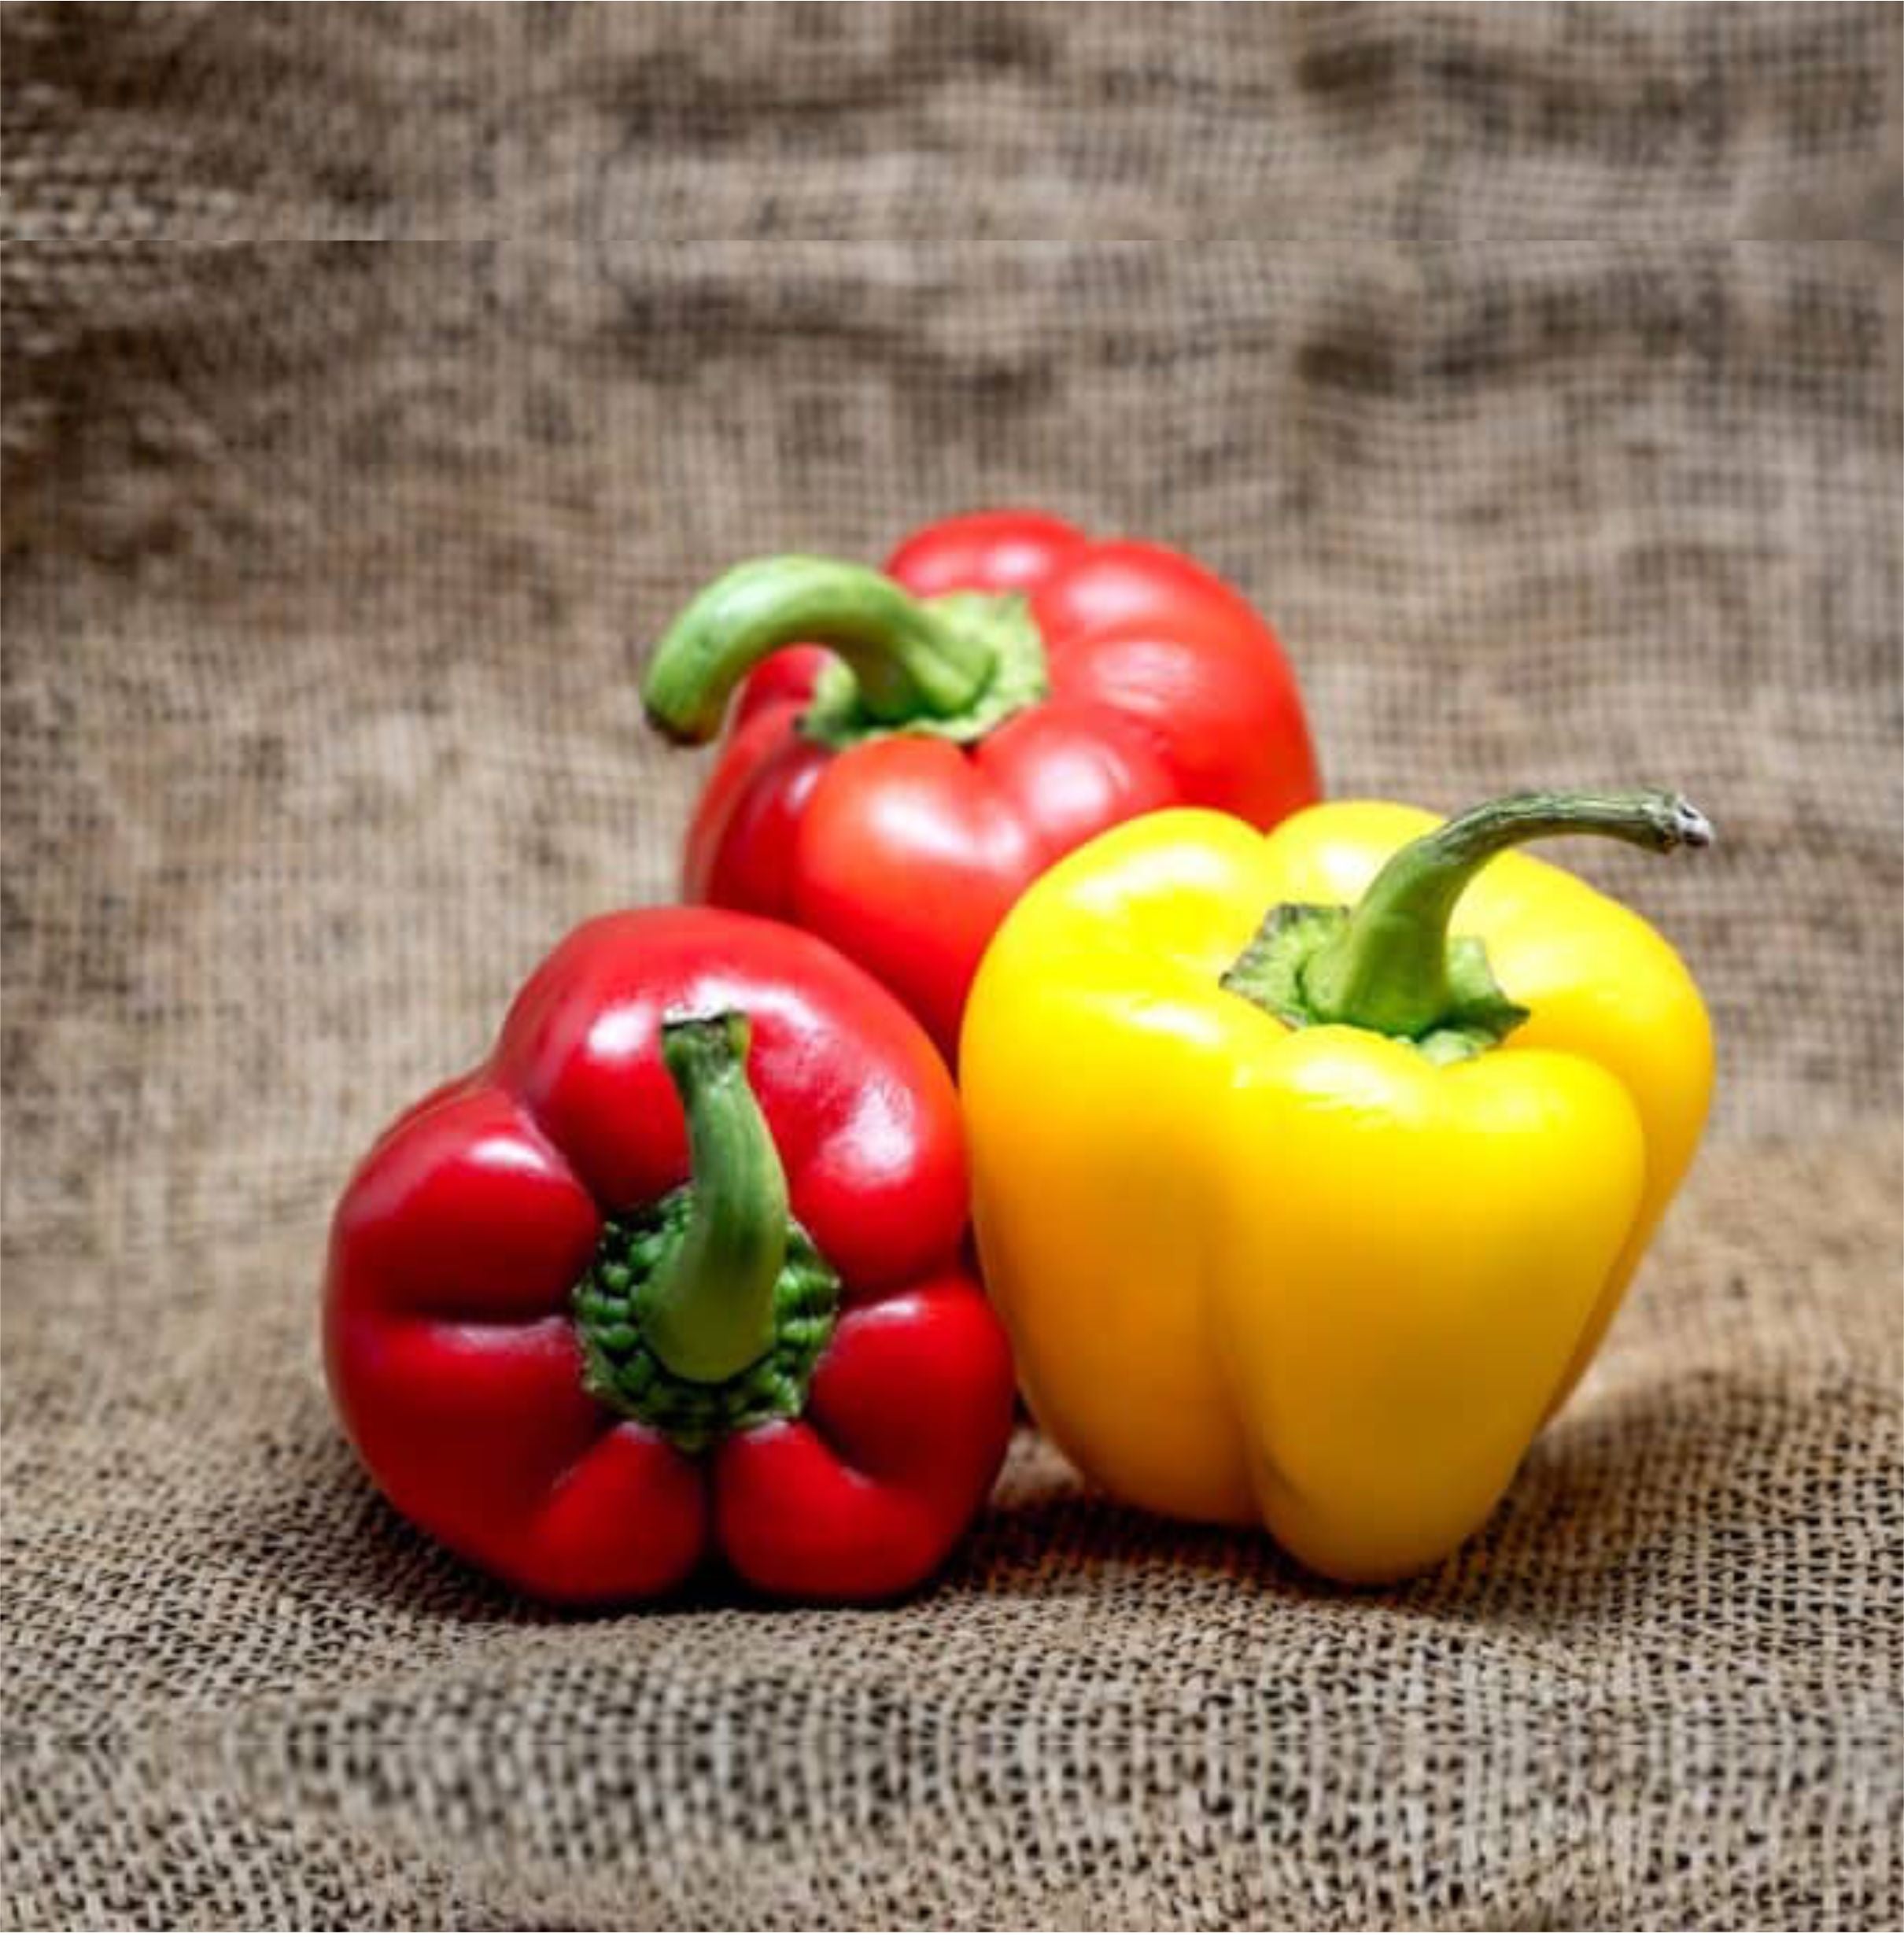 Hydroponic Bell pepper (red/yellow)